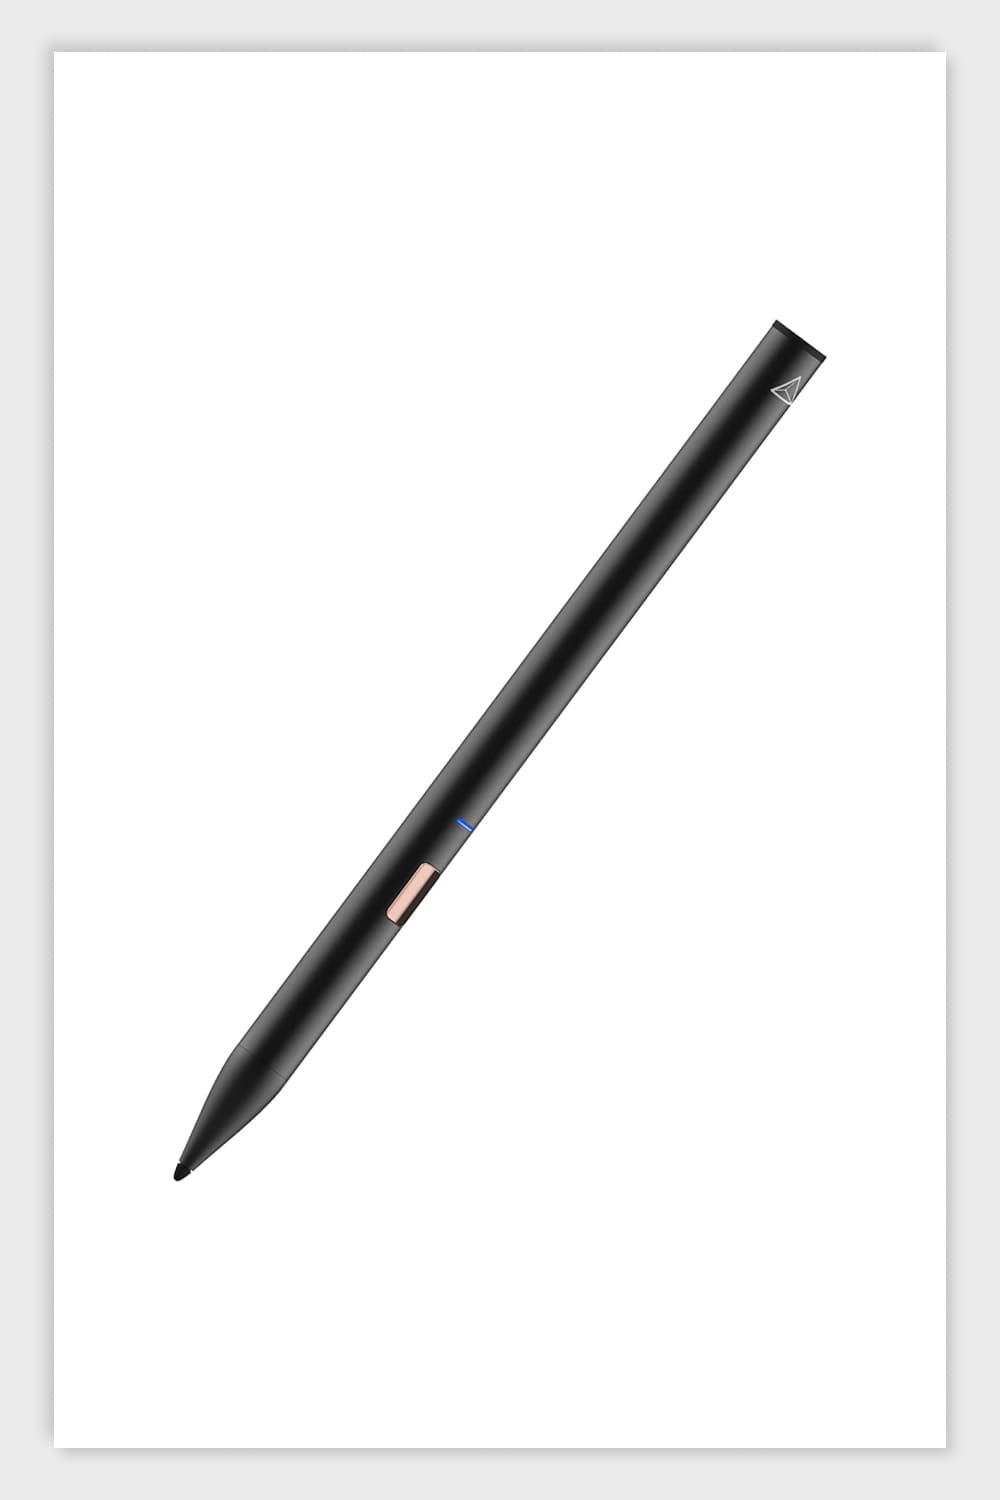 Black Adonit Note2 Dust-Proof and Waterproof Stylus Pen for iPad.